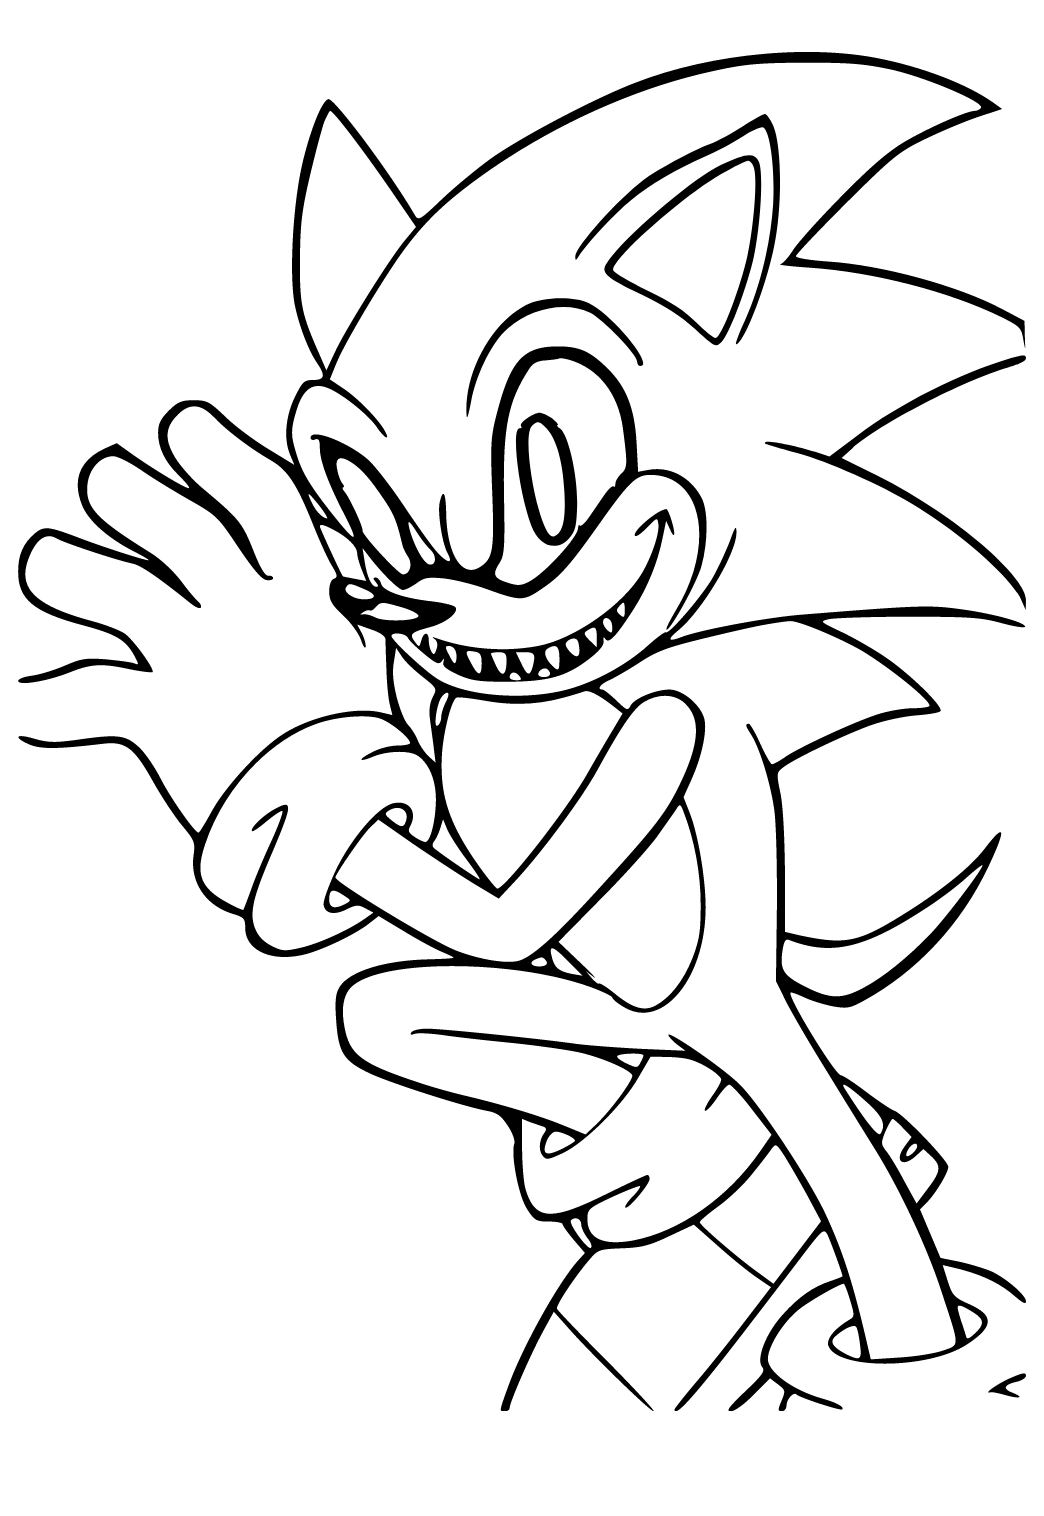 Free Printable Sonic EXE Coloring Pages For Kids  Coloring books, Cartoon  coloring pages, Halloween coloring book